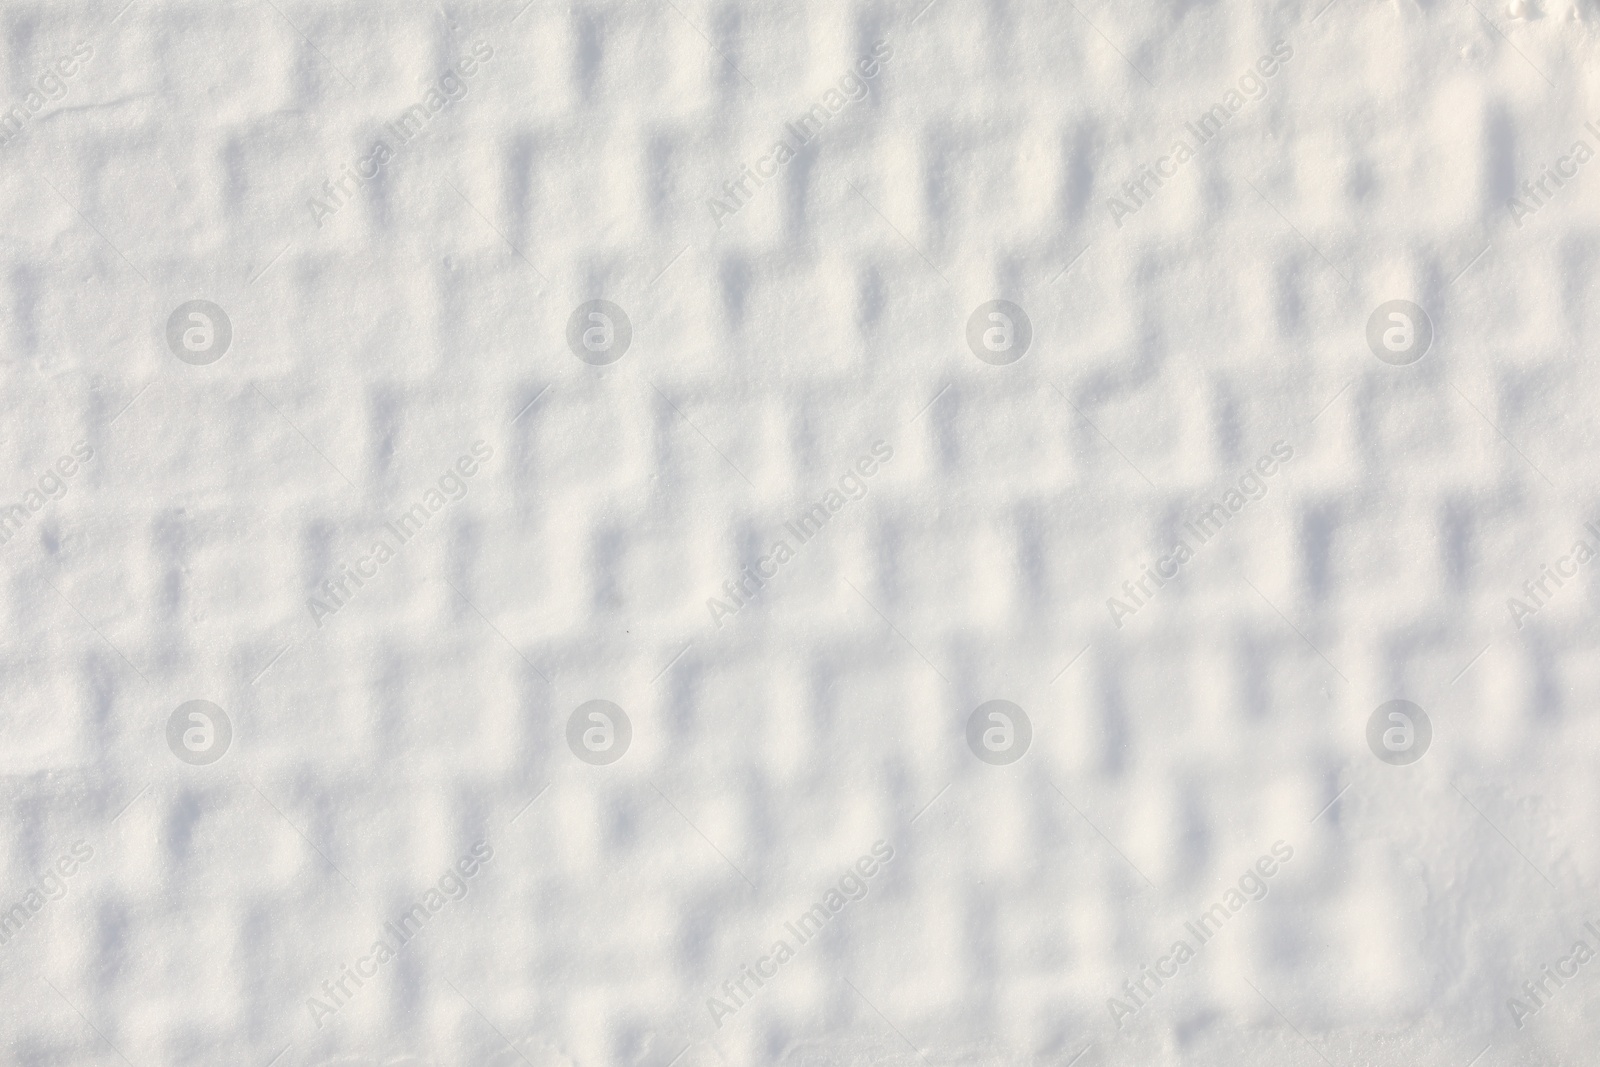 Photo of White snow with pattern as background, top view. Winter season